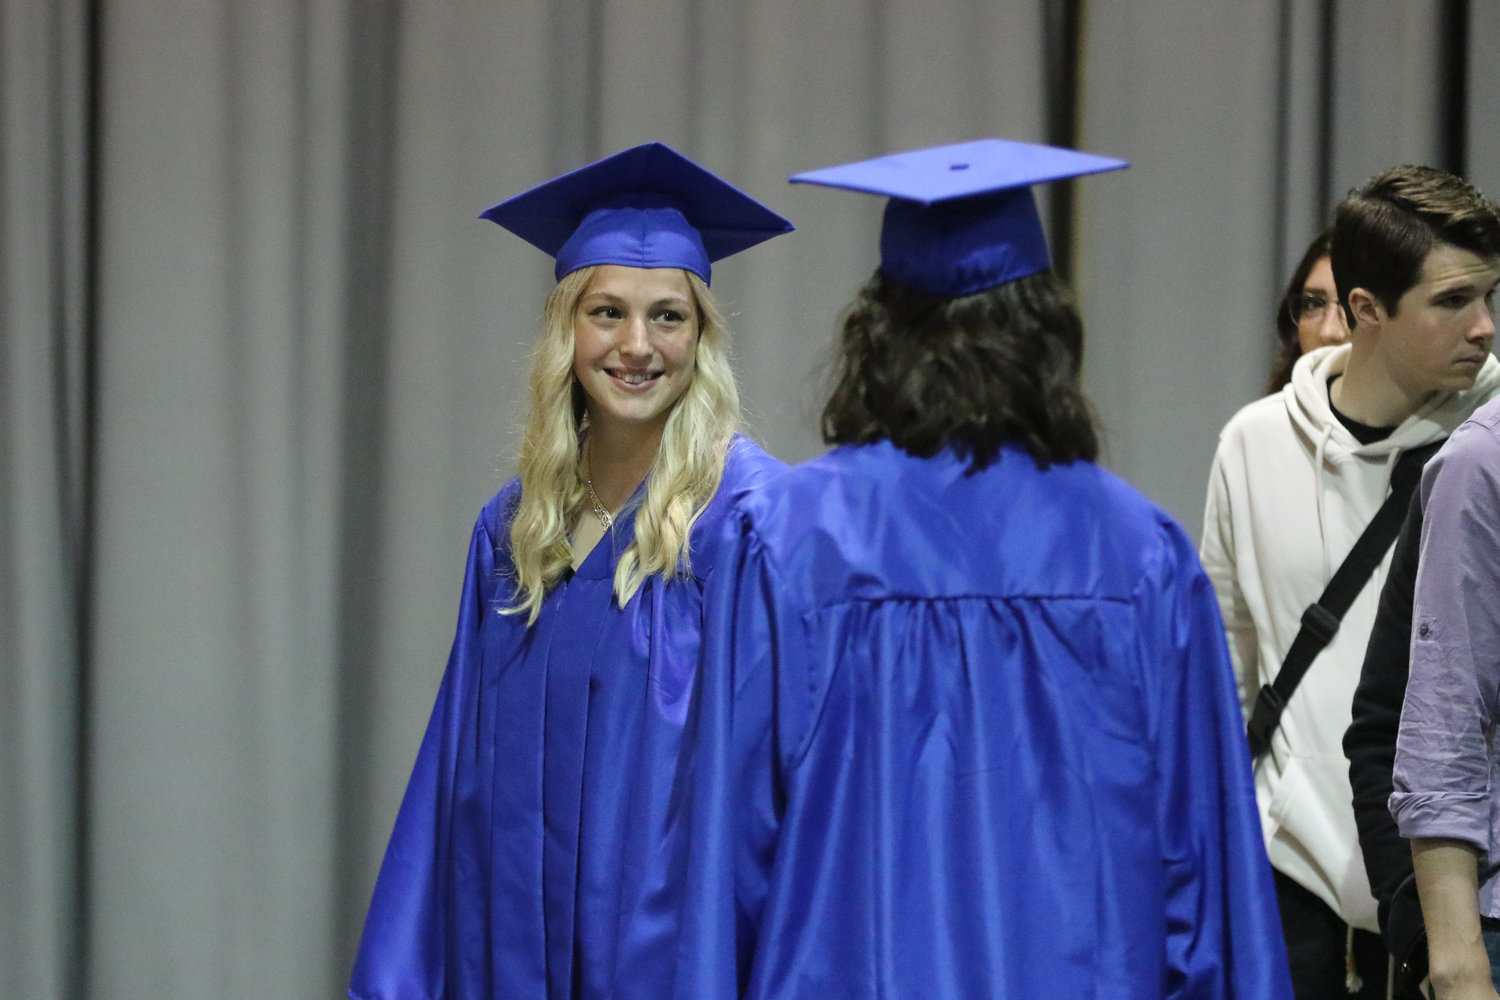 Mariah Miller takes her seat during Pathway Christian School's graduation ceremony on May 16, 2021.